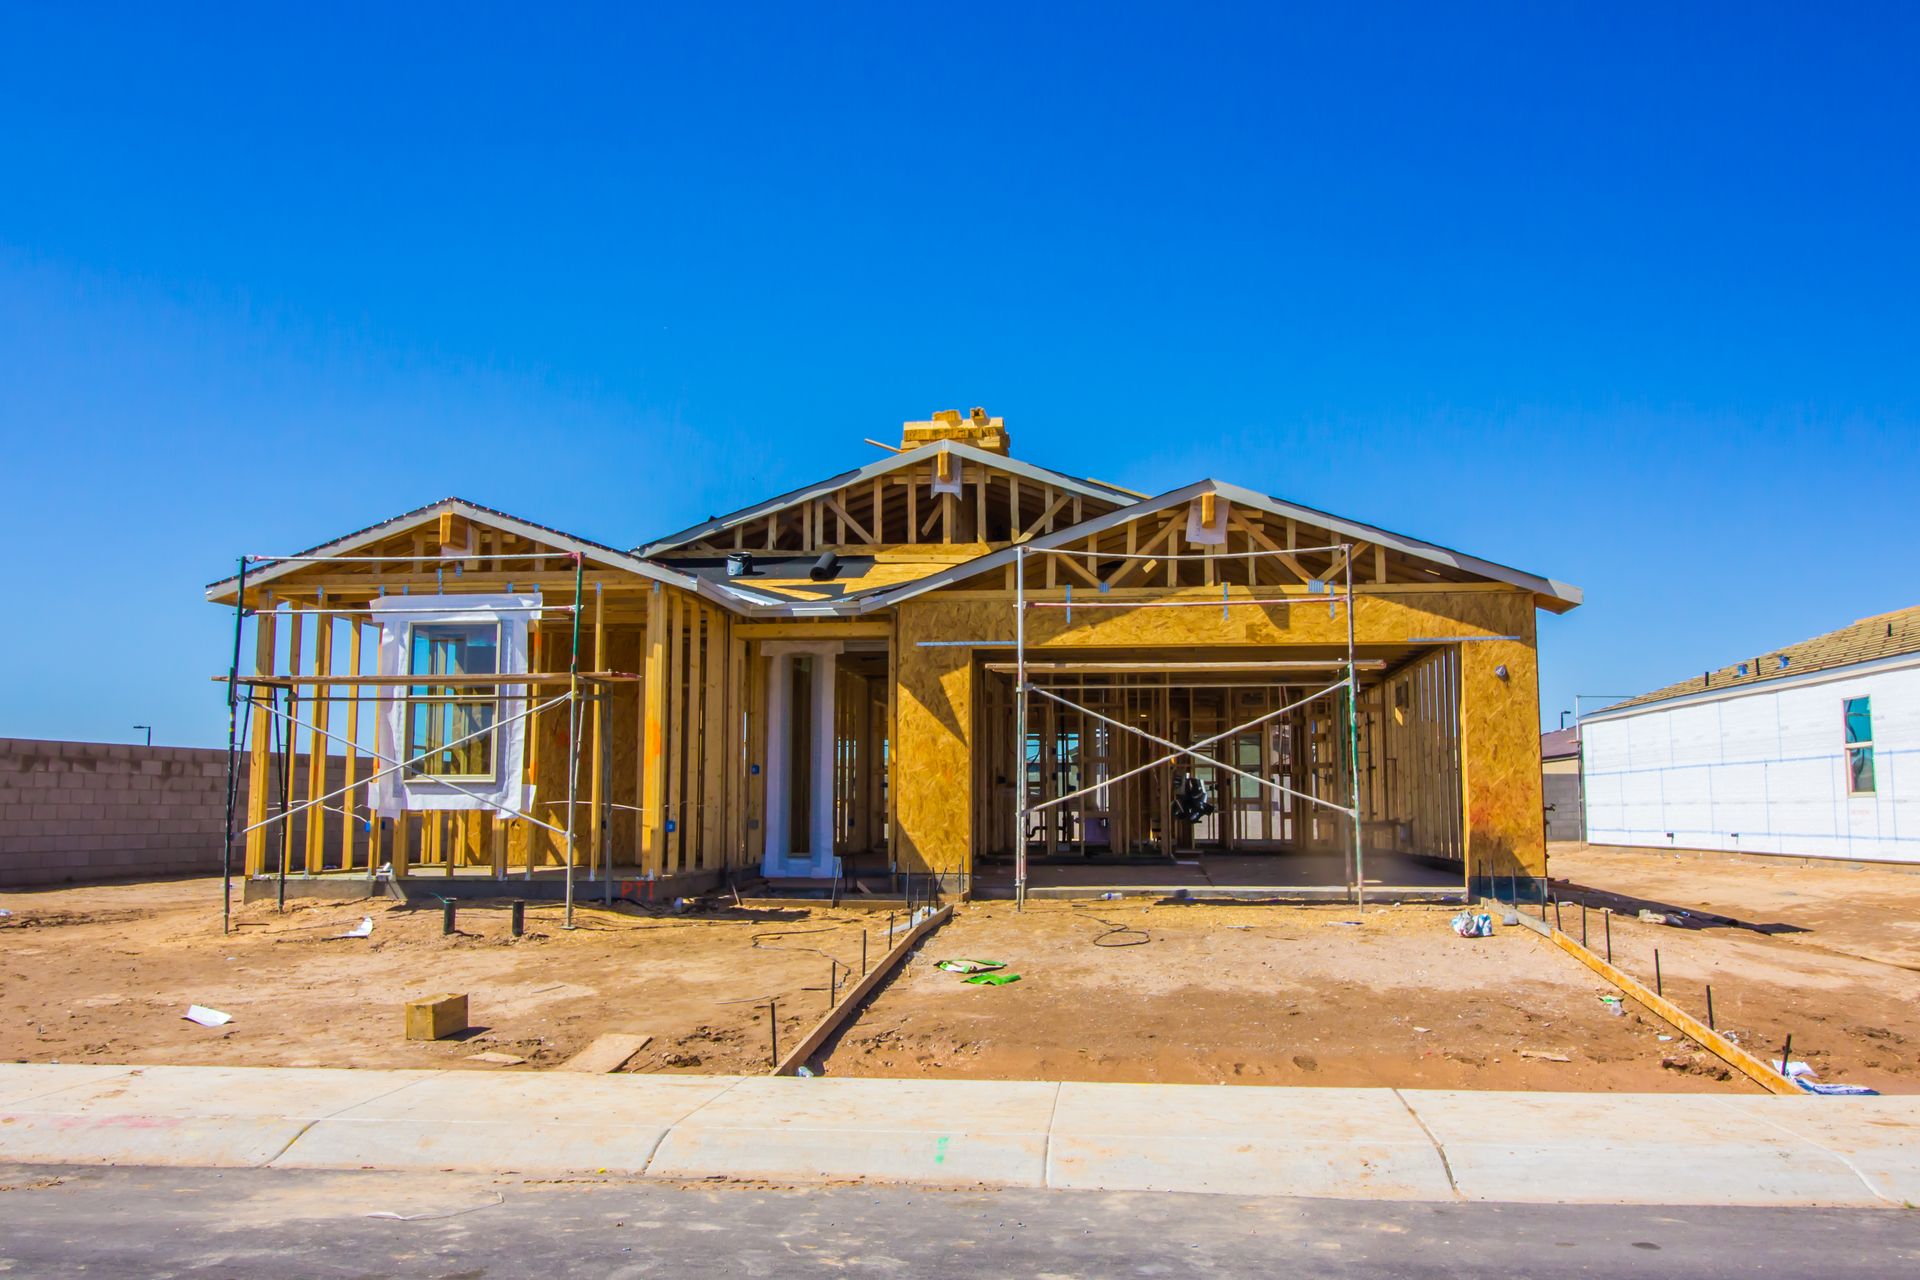 7 Ways to Reduce New Construction Greenhouse Gas Emissions